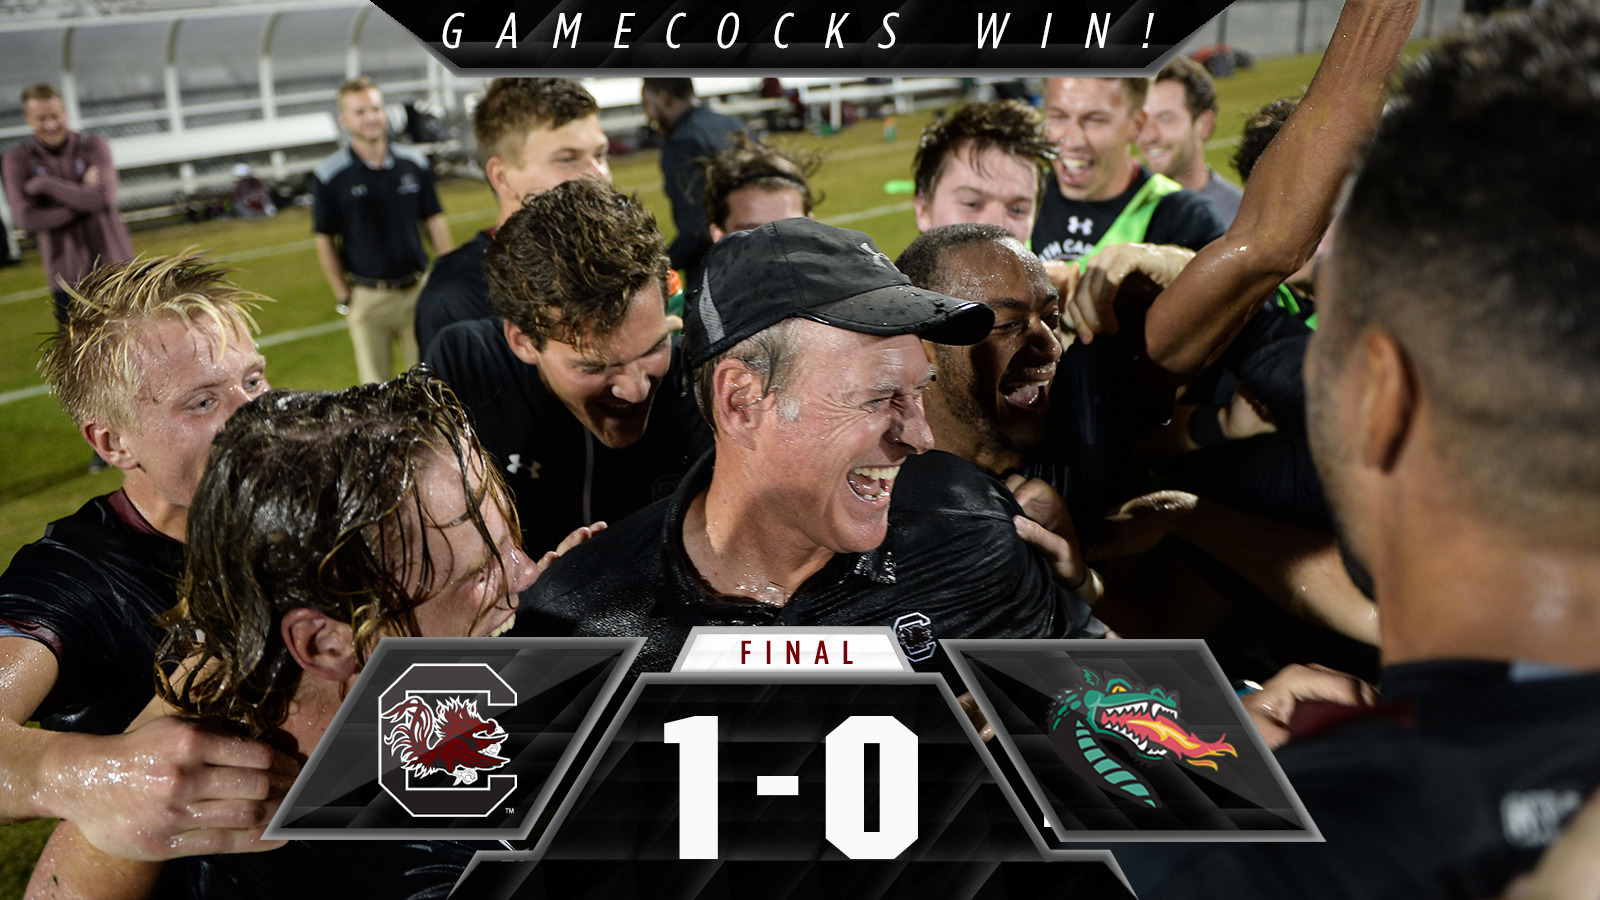 Gamecocks Shutout UAB, 1-0, for Berson's 500th Win